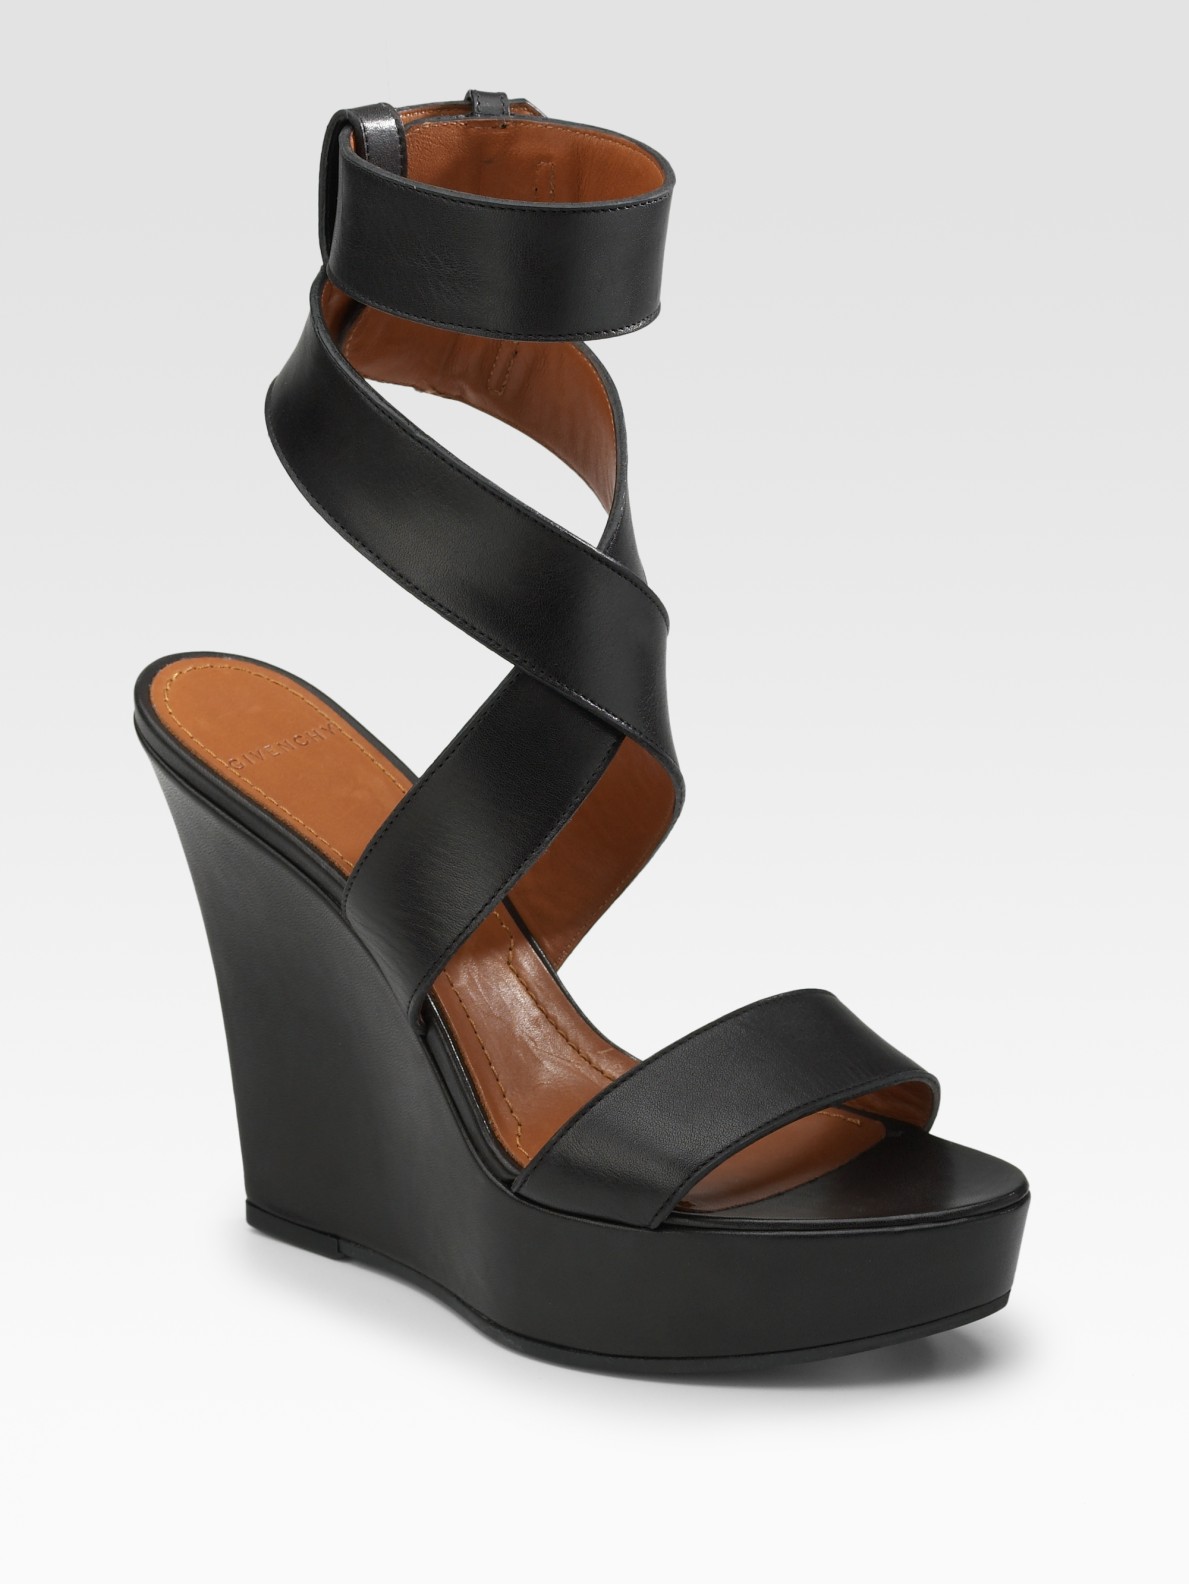 Lyst Givenchy Corinne Strappy Wedge Sandals  in Black